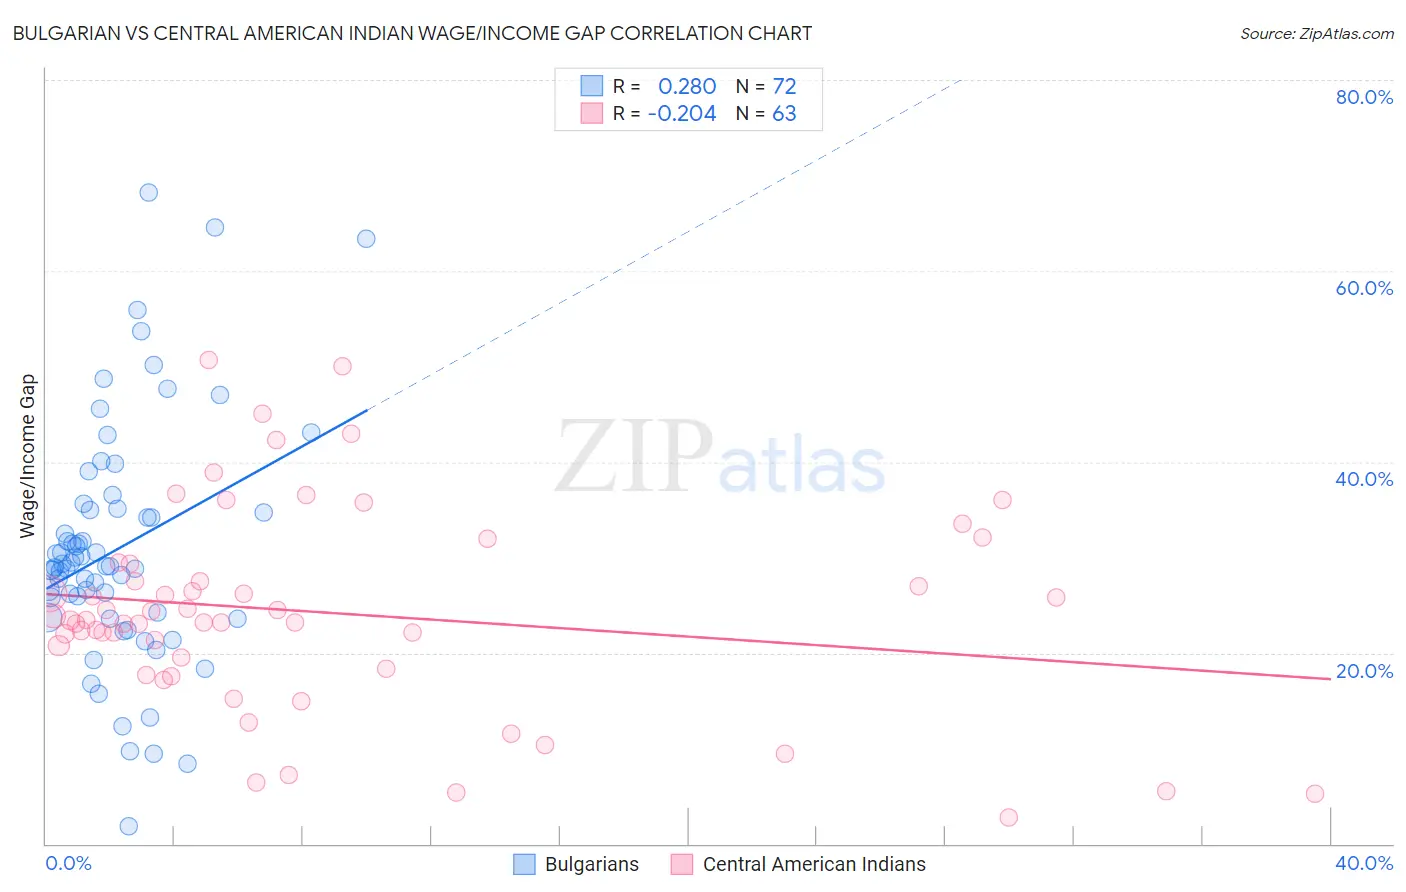 Bulgarian vs Central American Indian Wage/Income Gap